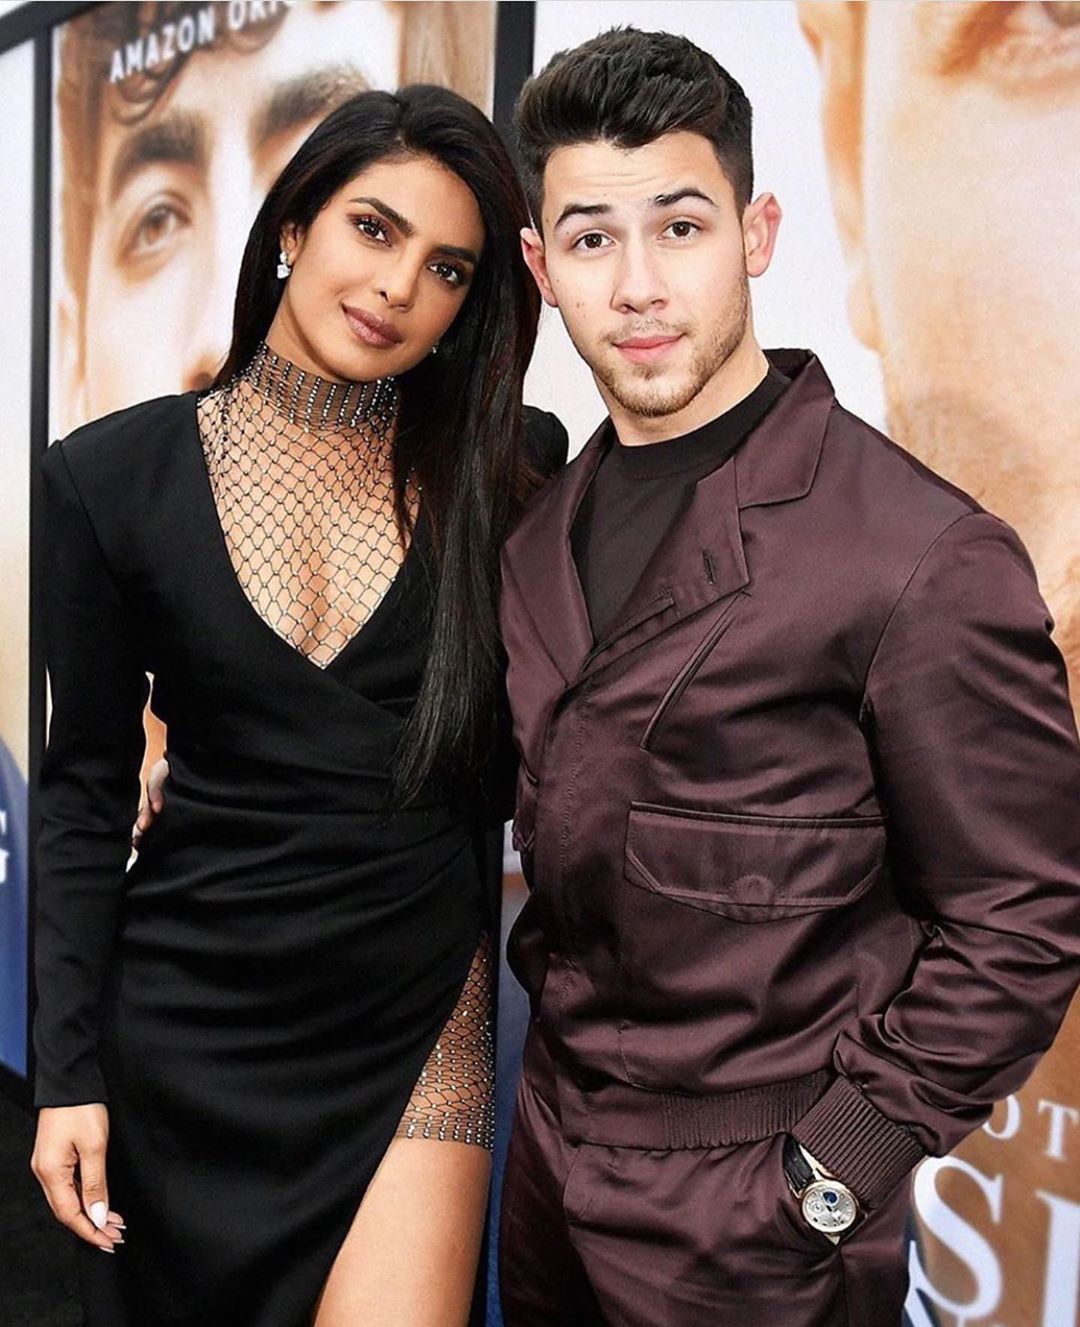 The Lyrics Of Nick Jonas’ ‘I Believe’ Dedicated To Wife Priyanka Chopra Are The Most Romantic Thing You'll Read Today